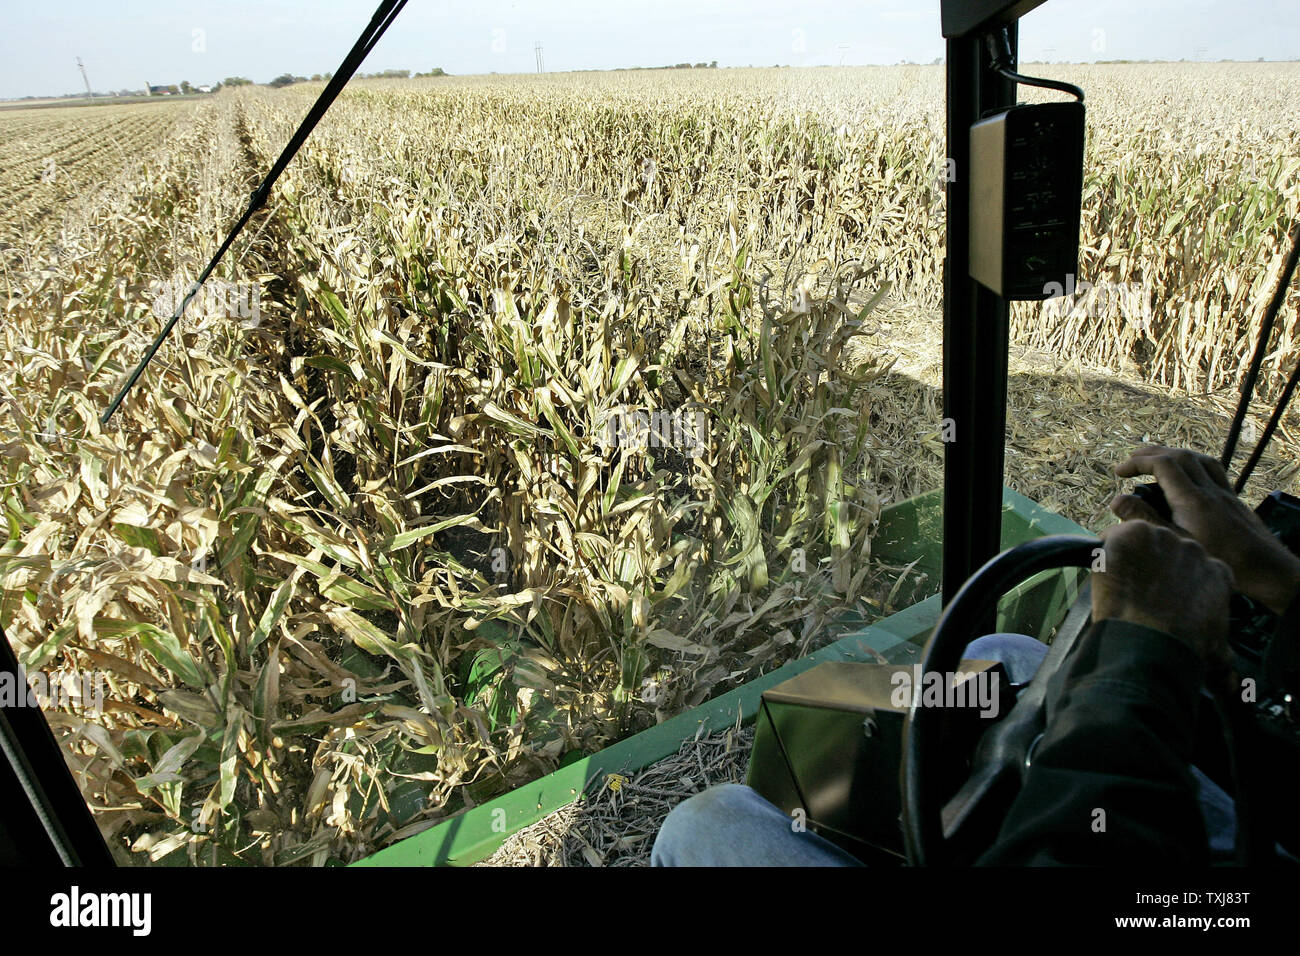 Brad Weber harvests corn on land he rents near Manteno, Illinois on October 20, 2008. Corn for December delivery rose $0.155 per bushel at the Chicago Board of Trade closing at $4.185 Monday as rebounding oil markets shift investor focus to commodities. (UPI Photo/Brian Kersey) Stock Photo